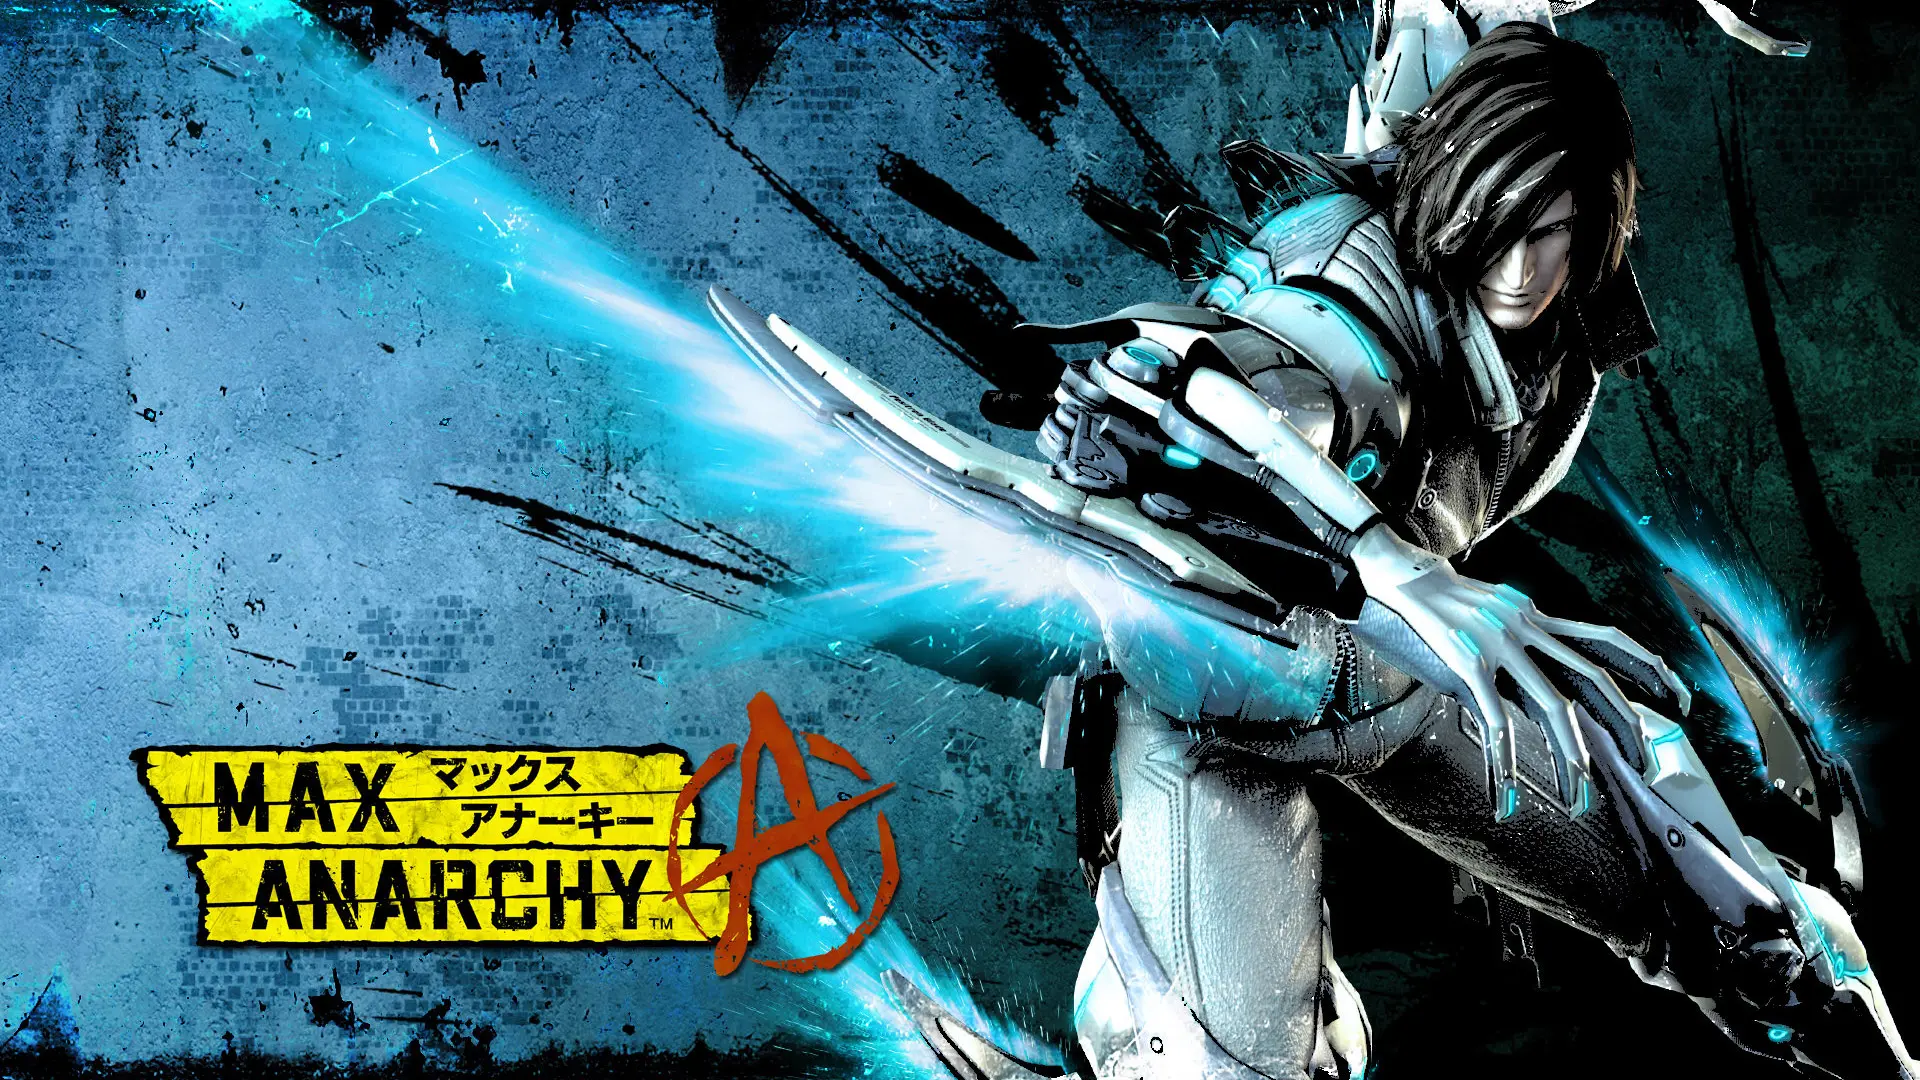 Game Anarchy Reigns wallpaper 2 | Background Image